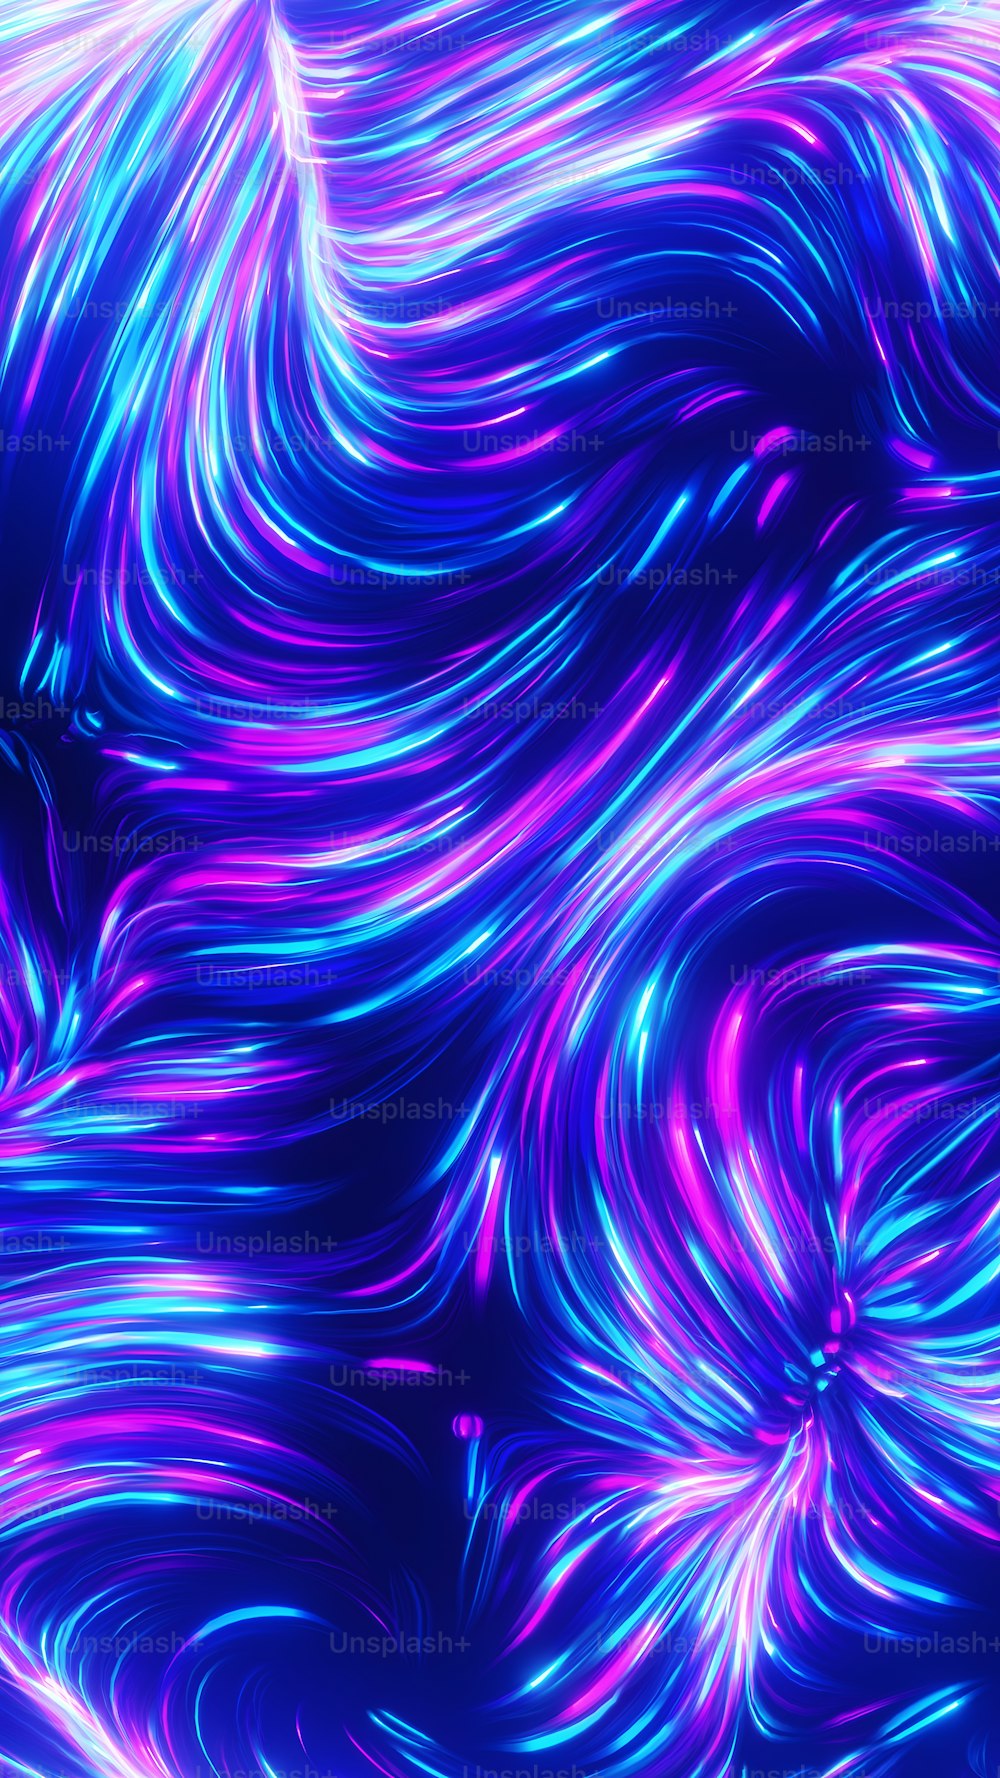 a blue and purple background with swirls of light